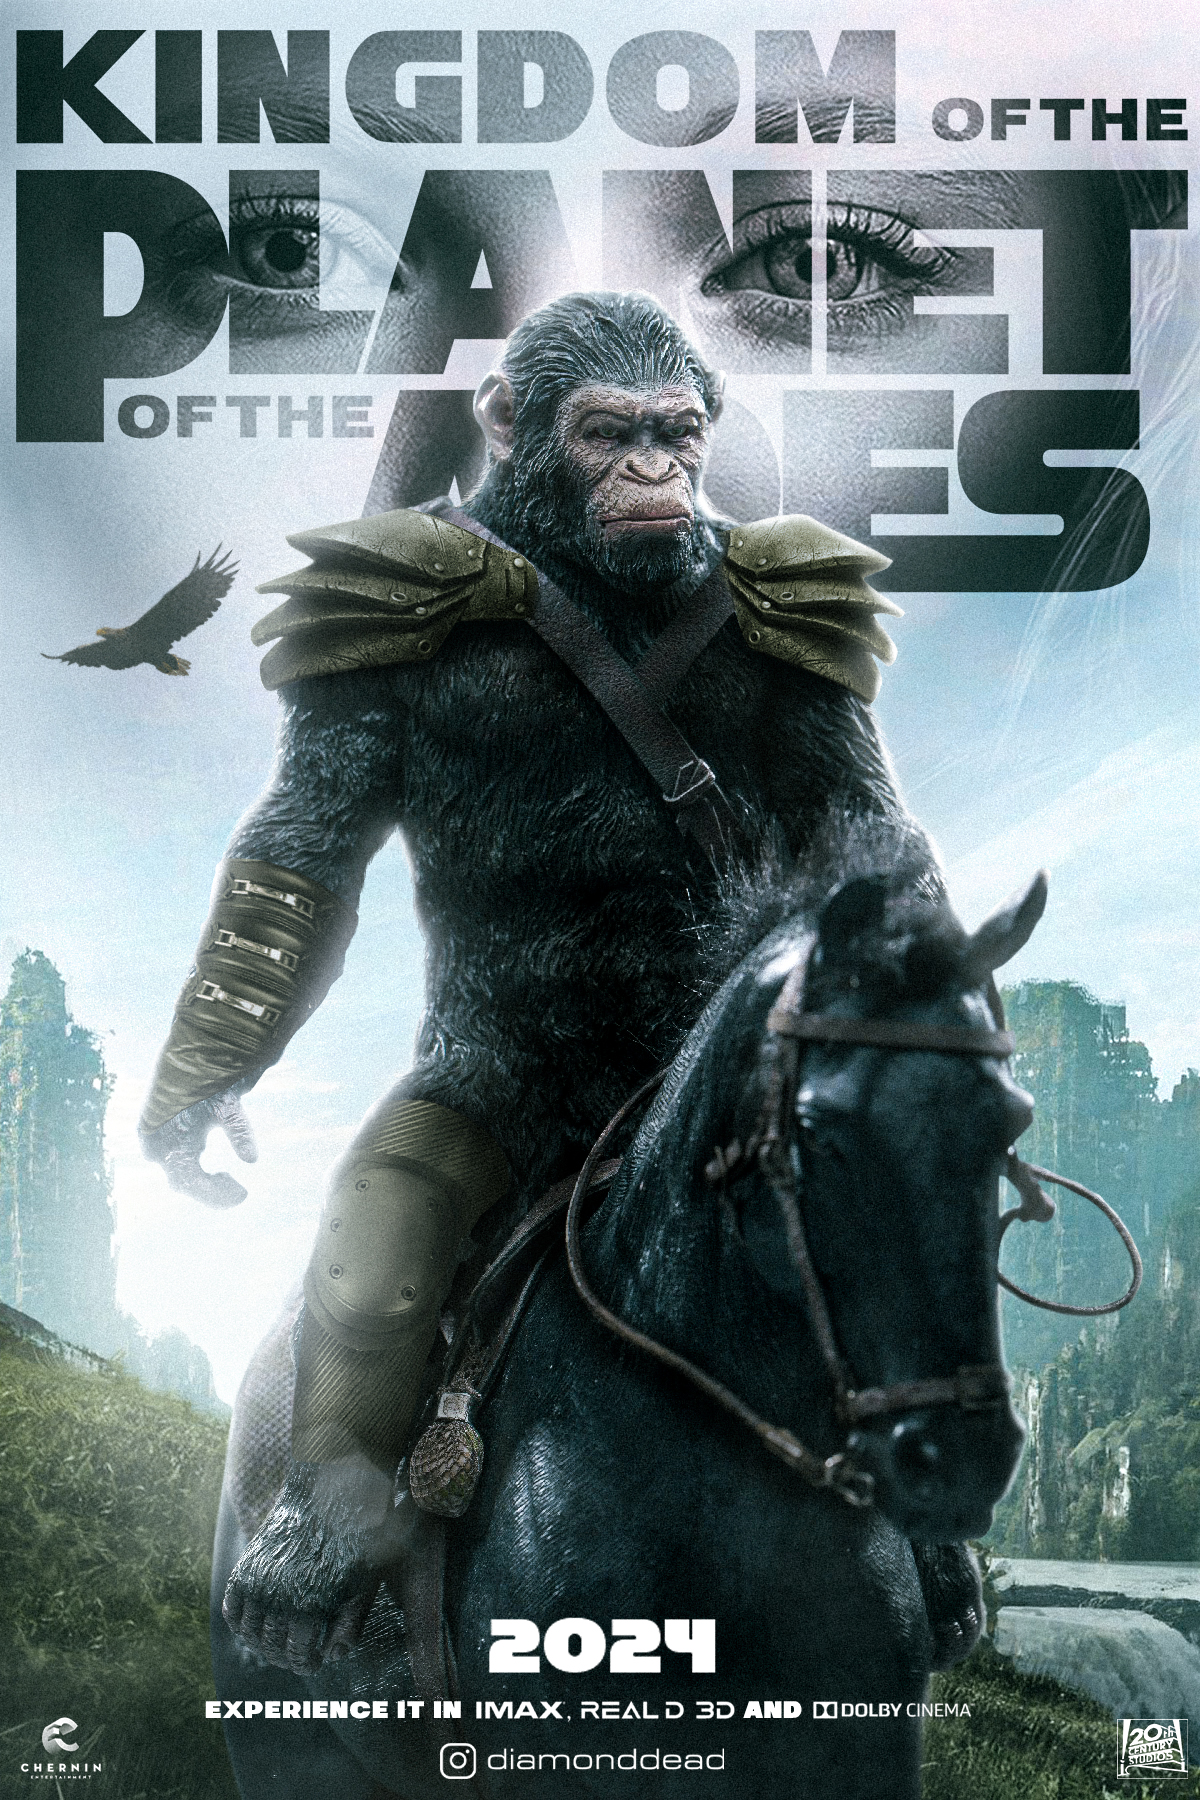 Kingdom of the Planet of the Apes by diamonddead-Art on DeviantArt